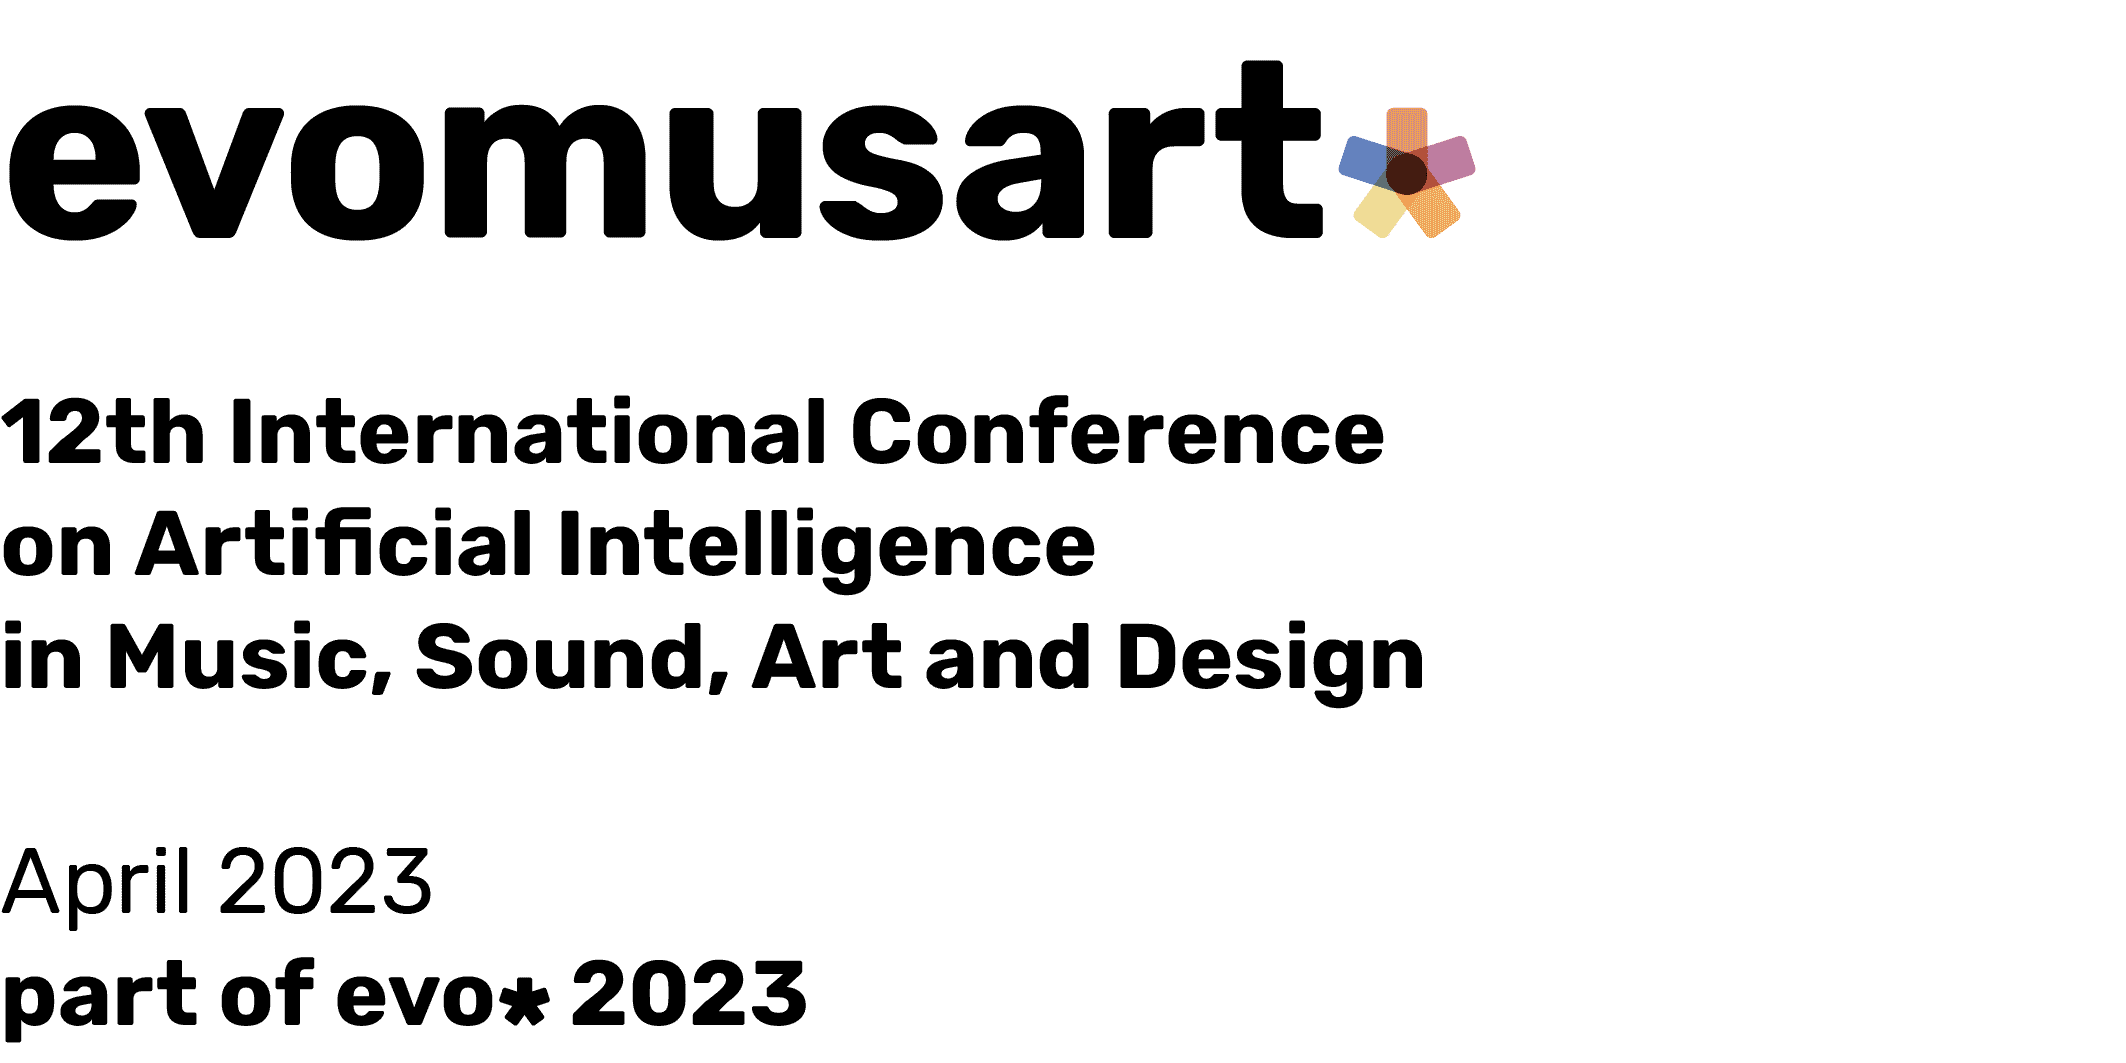 12th International Conference on Artificial Intelligence in Music, Sound, Art and Design 2023 (EvoMUSART)